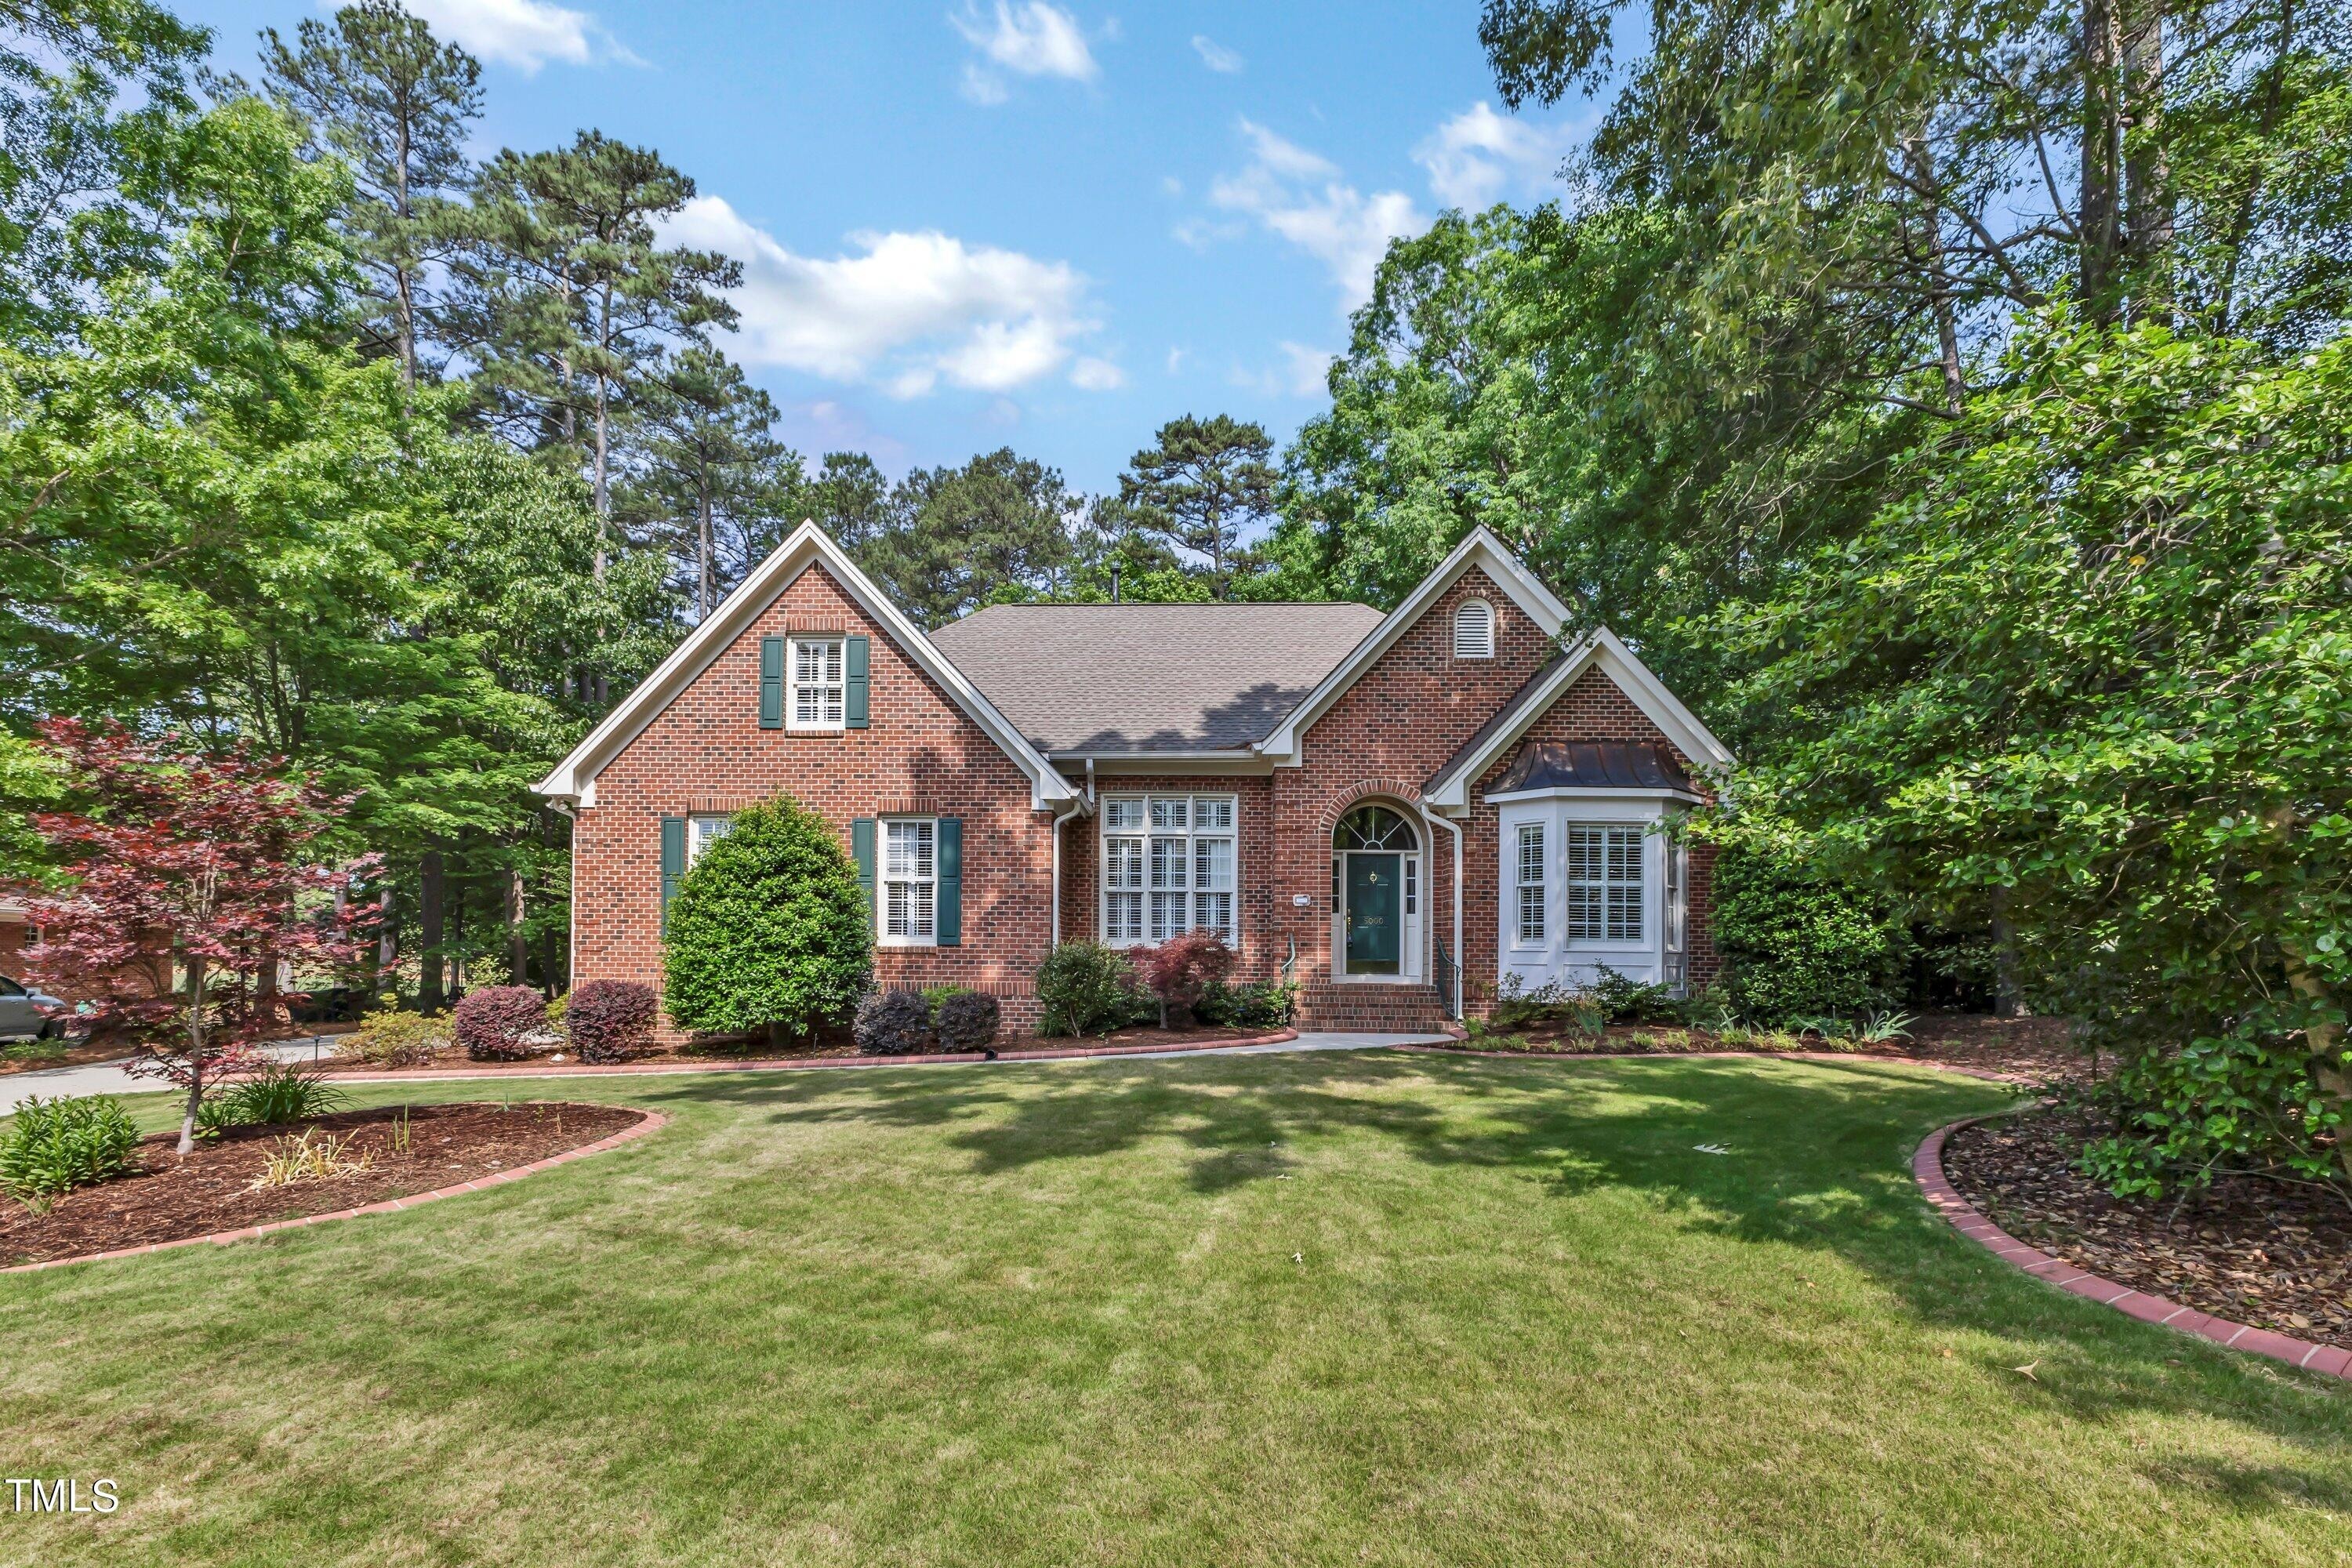 2. 5000 Sunset Forest Circle